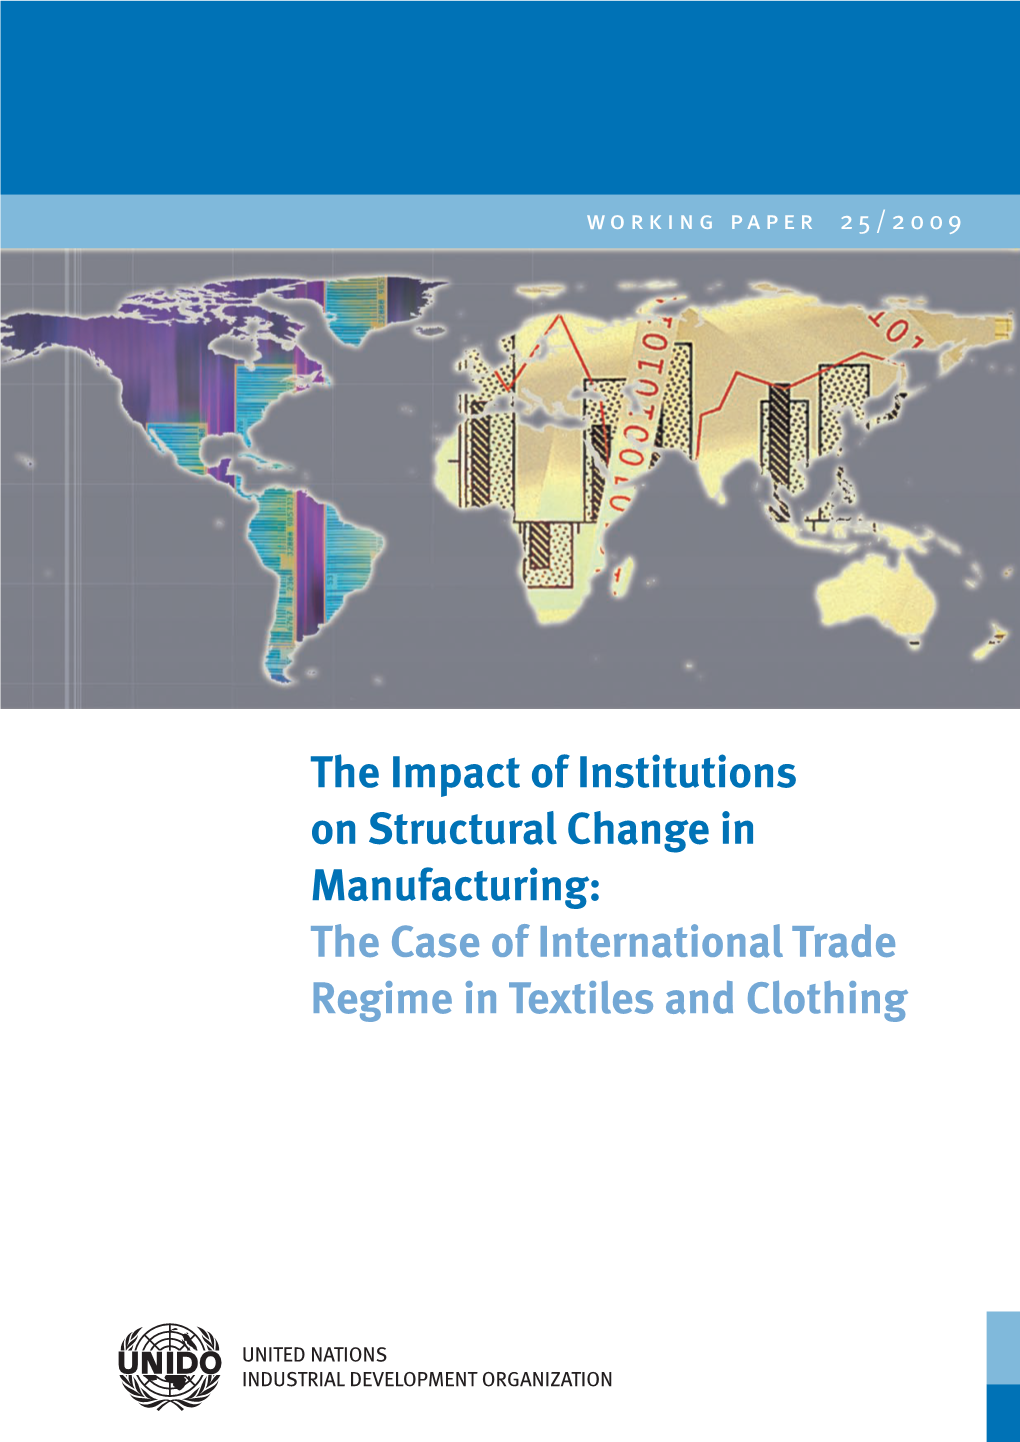 The Case of International Trade Regime in Textiles and Clothing